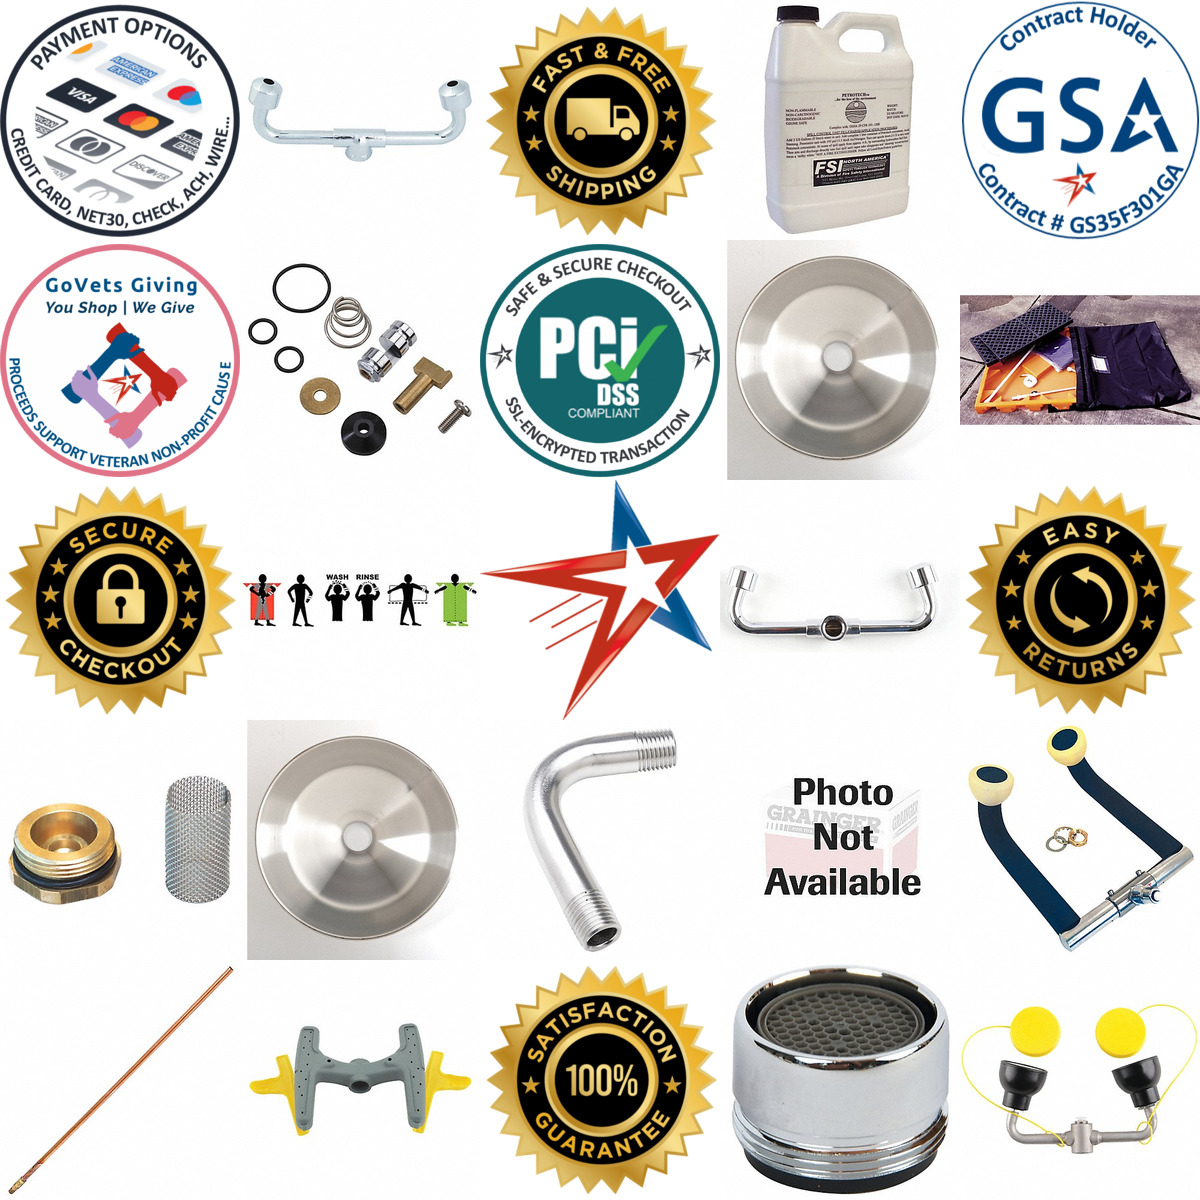 A selection of Eyewash and Shower Repair and Replacement Kits products on GoVets